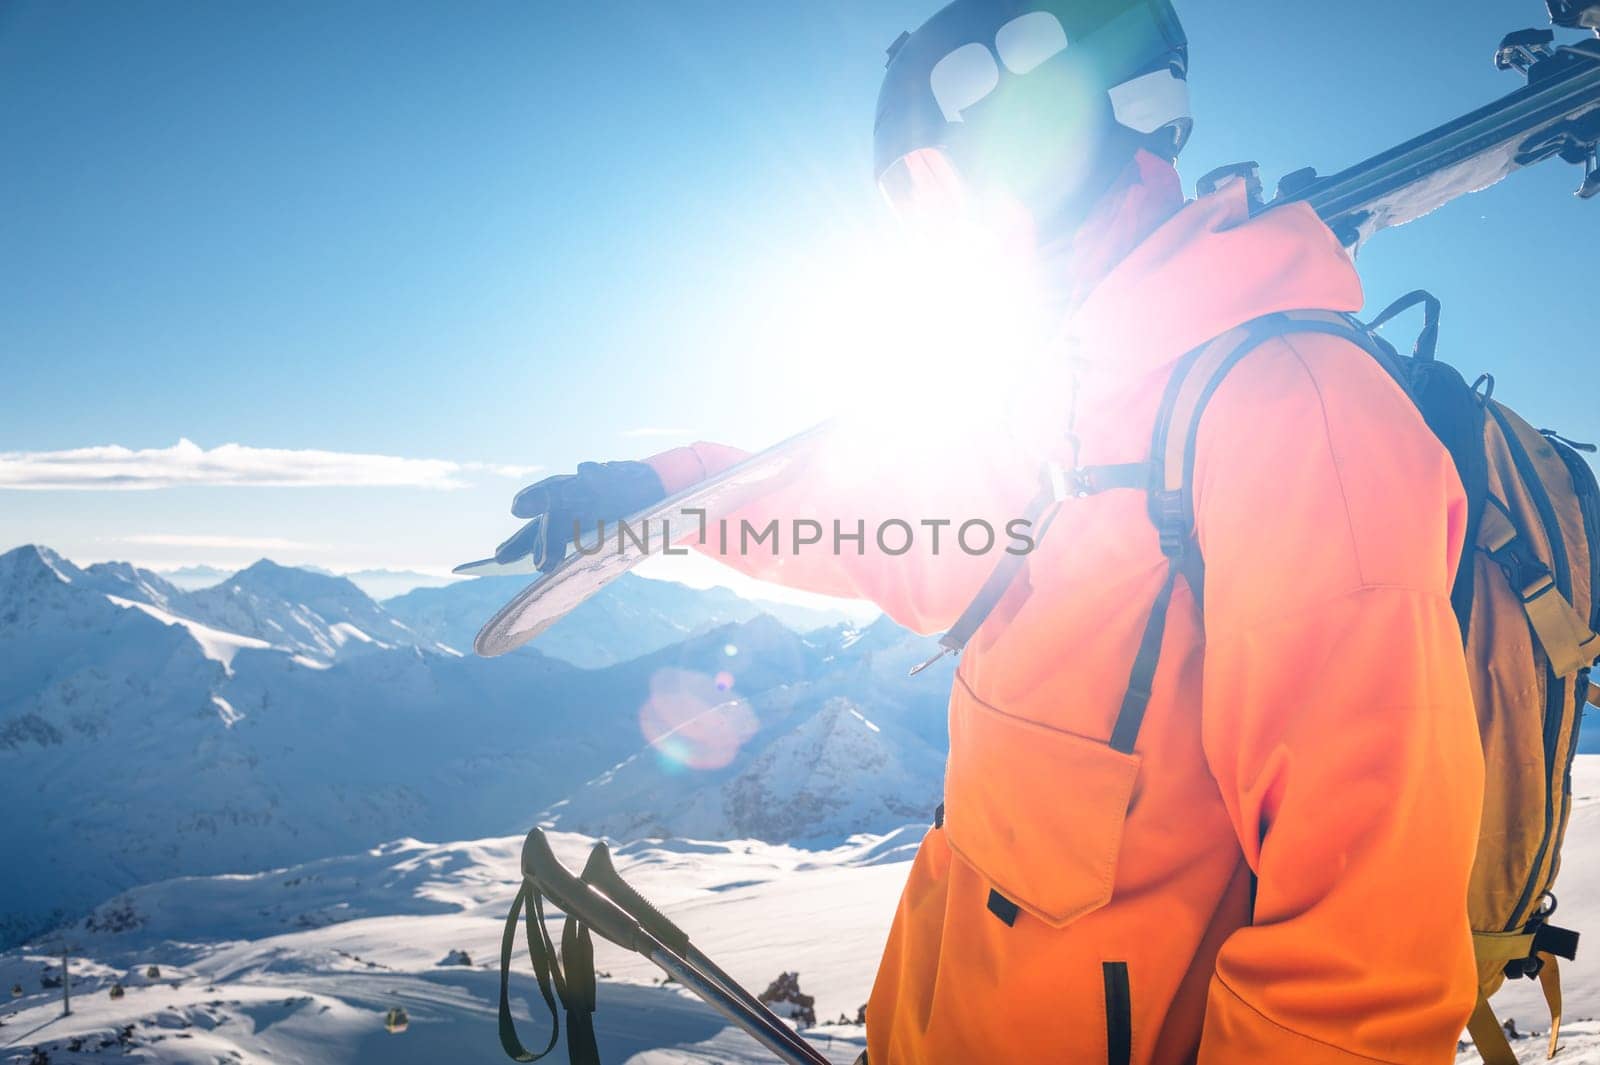 shot of a skier standing on top of a mountain with skis on his shoulder on a sunny winter day, sunlight, outdoor recreation, skiing, lifestyle, downhill sport concept by yanik88